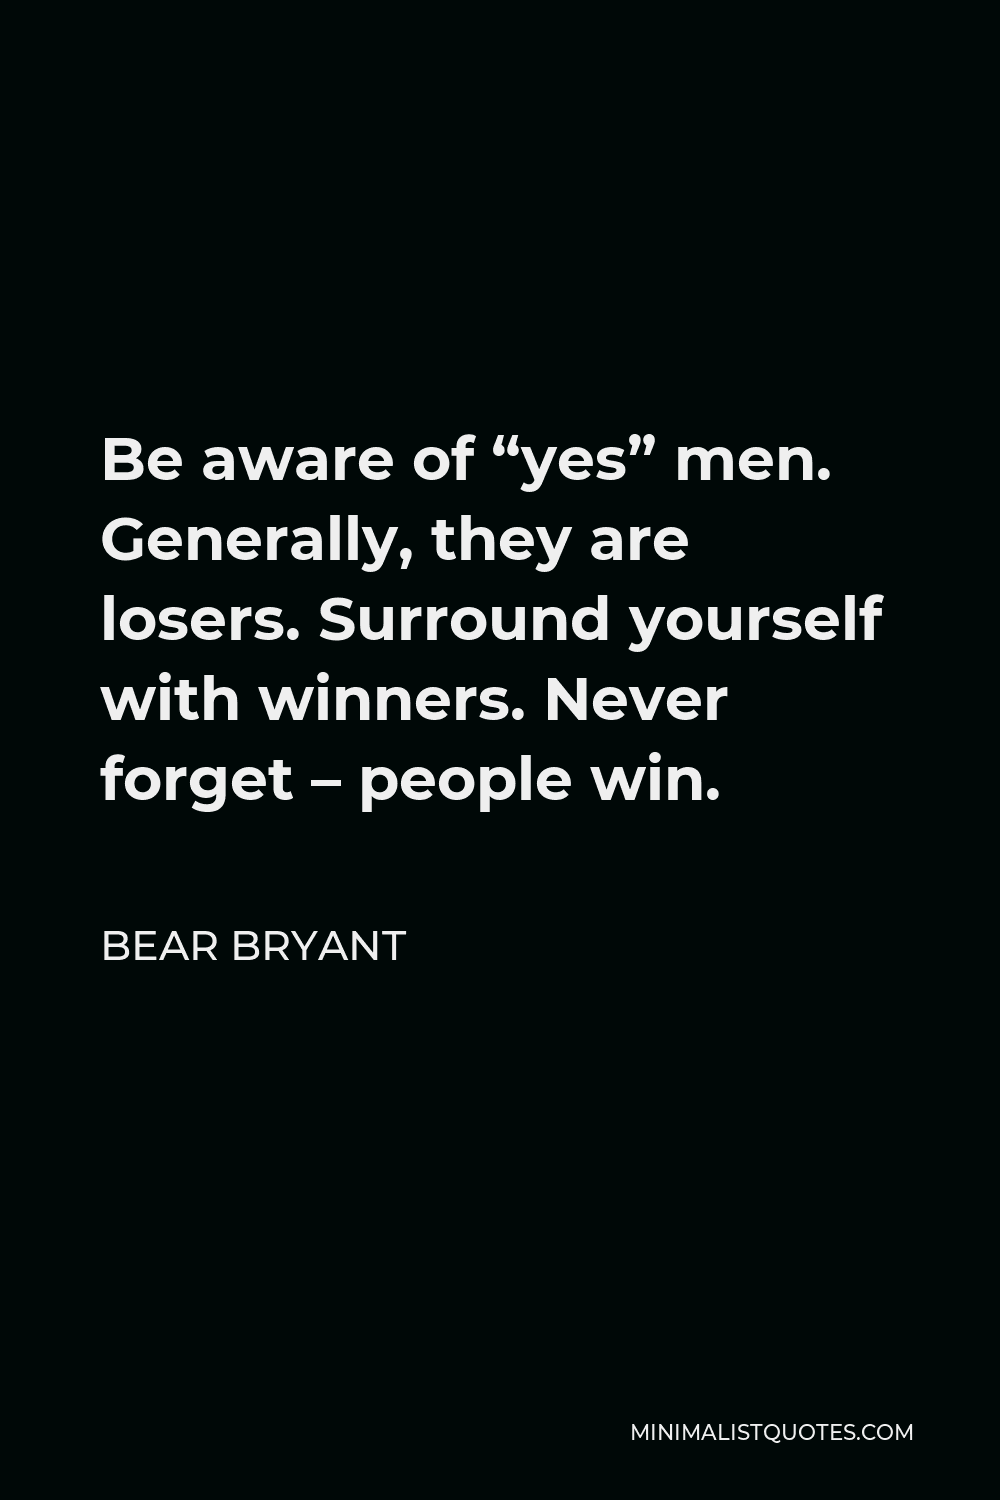 Bear Bryant Quote - Be aware of “yes” men. Generally, they are losers. Surround yourself with winners. Never forget – people win.